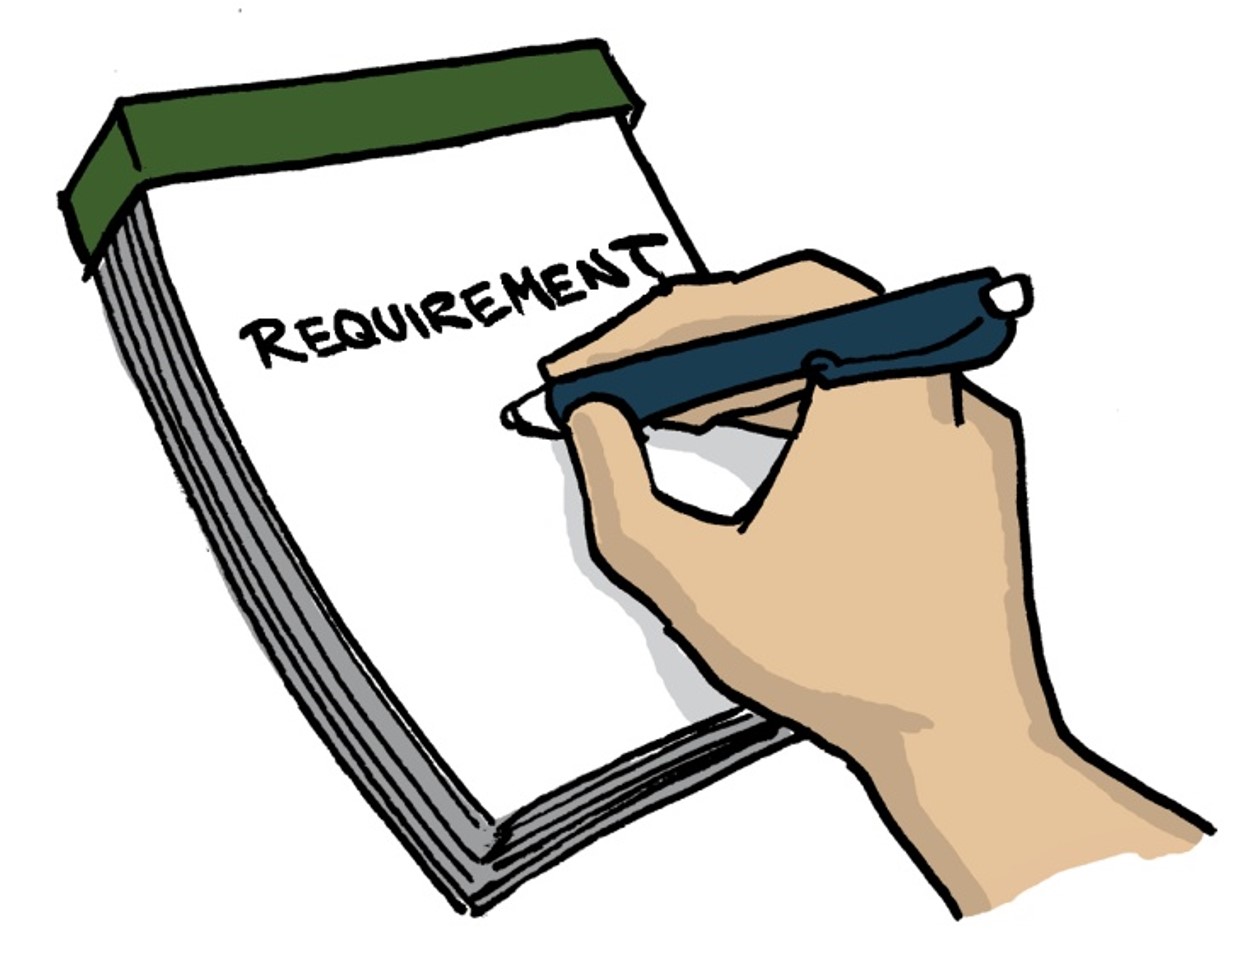 Illustration of a requirement specification.